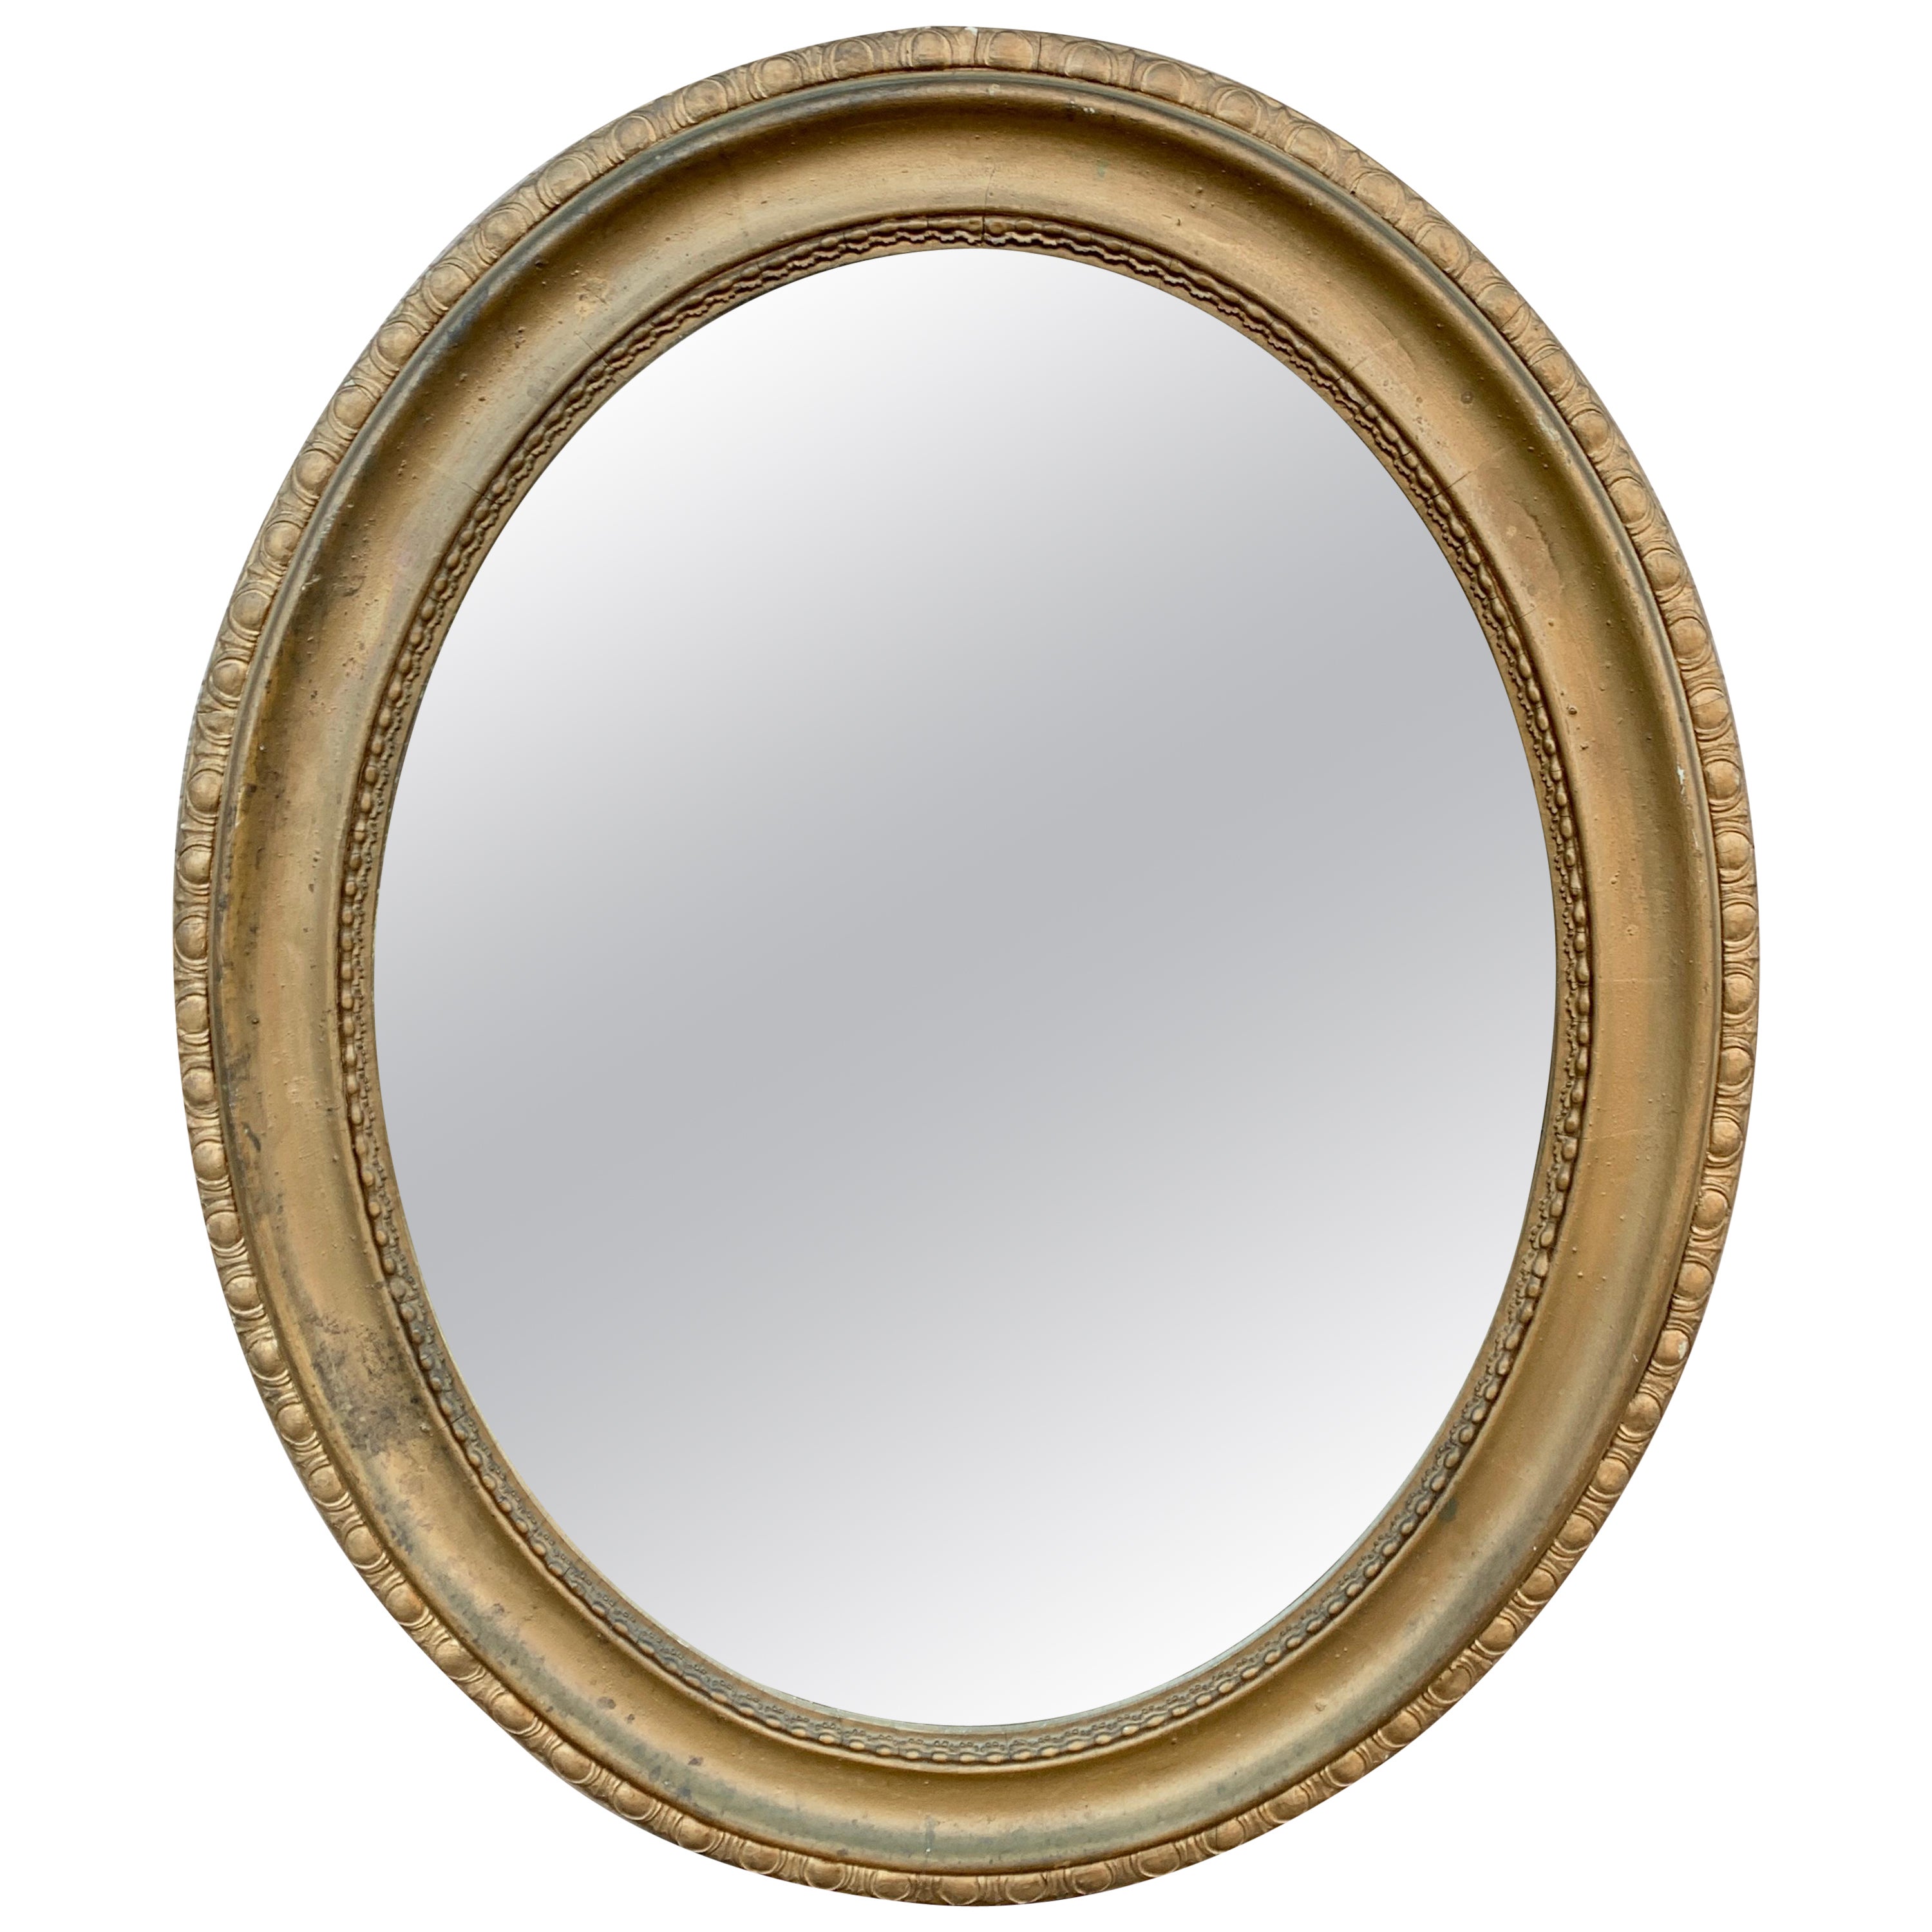 Antique Italian Giltwood Oval Mirror, Early 20th Century For Sale